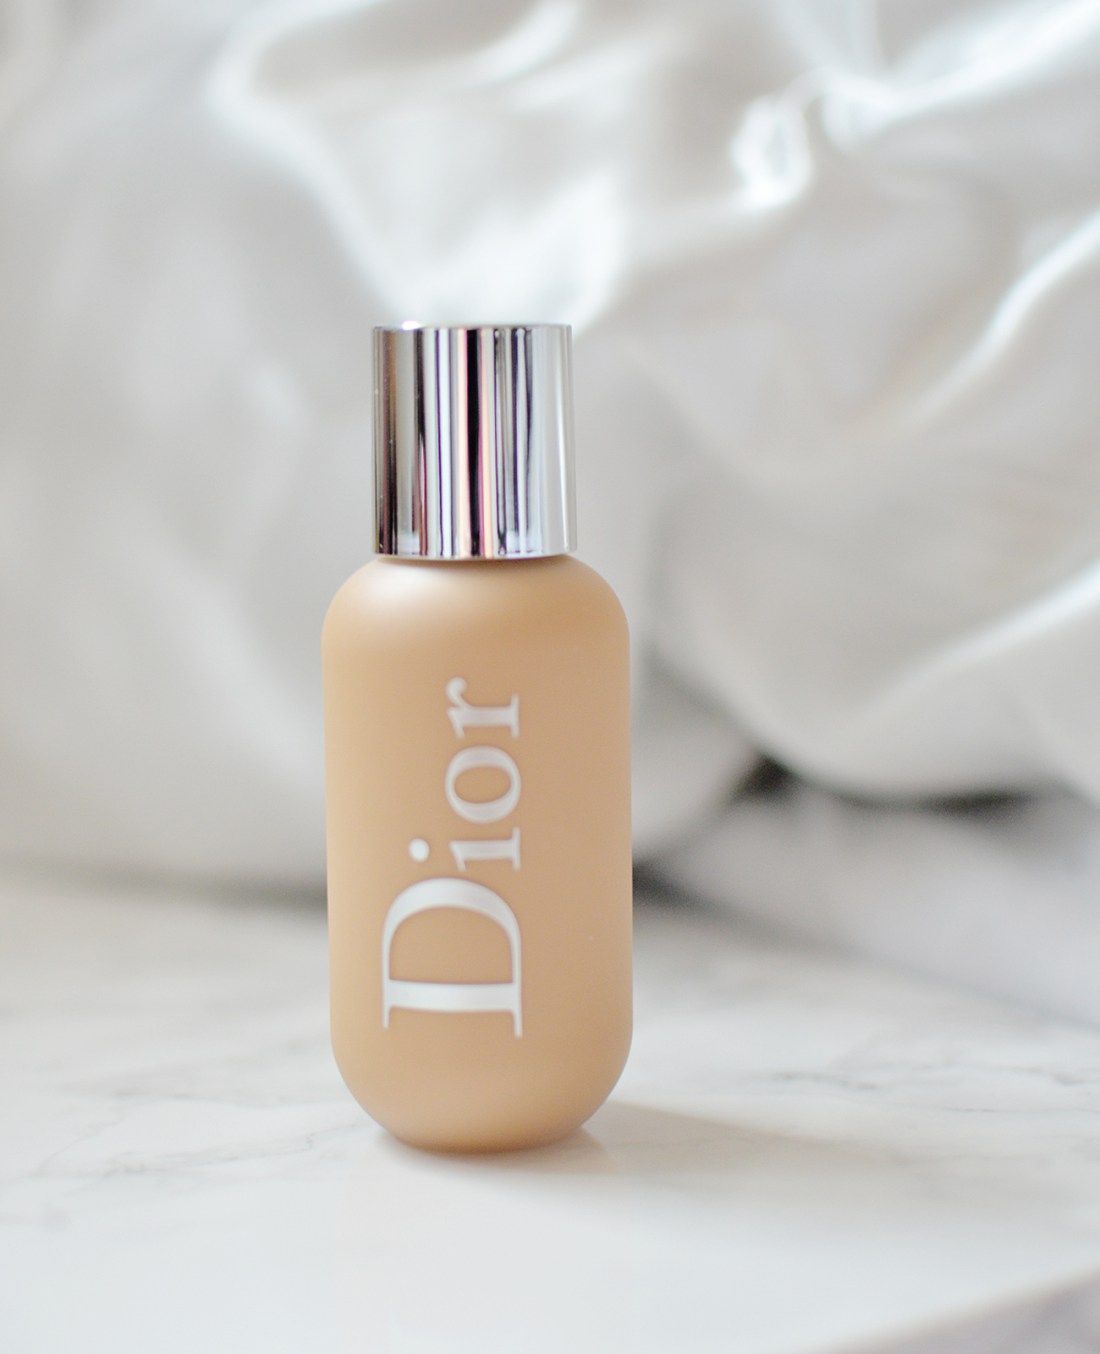 Dior Backstage Face & Body Foundation Review -   17 makeup Face foundation ideas